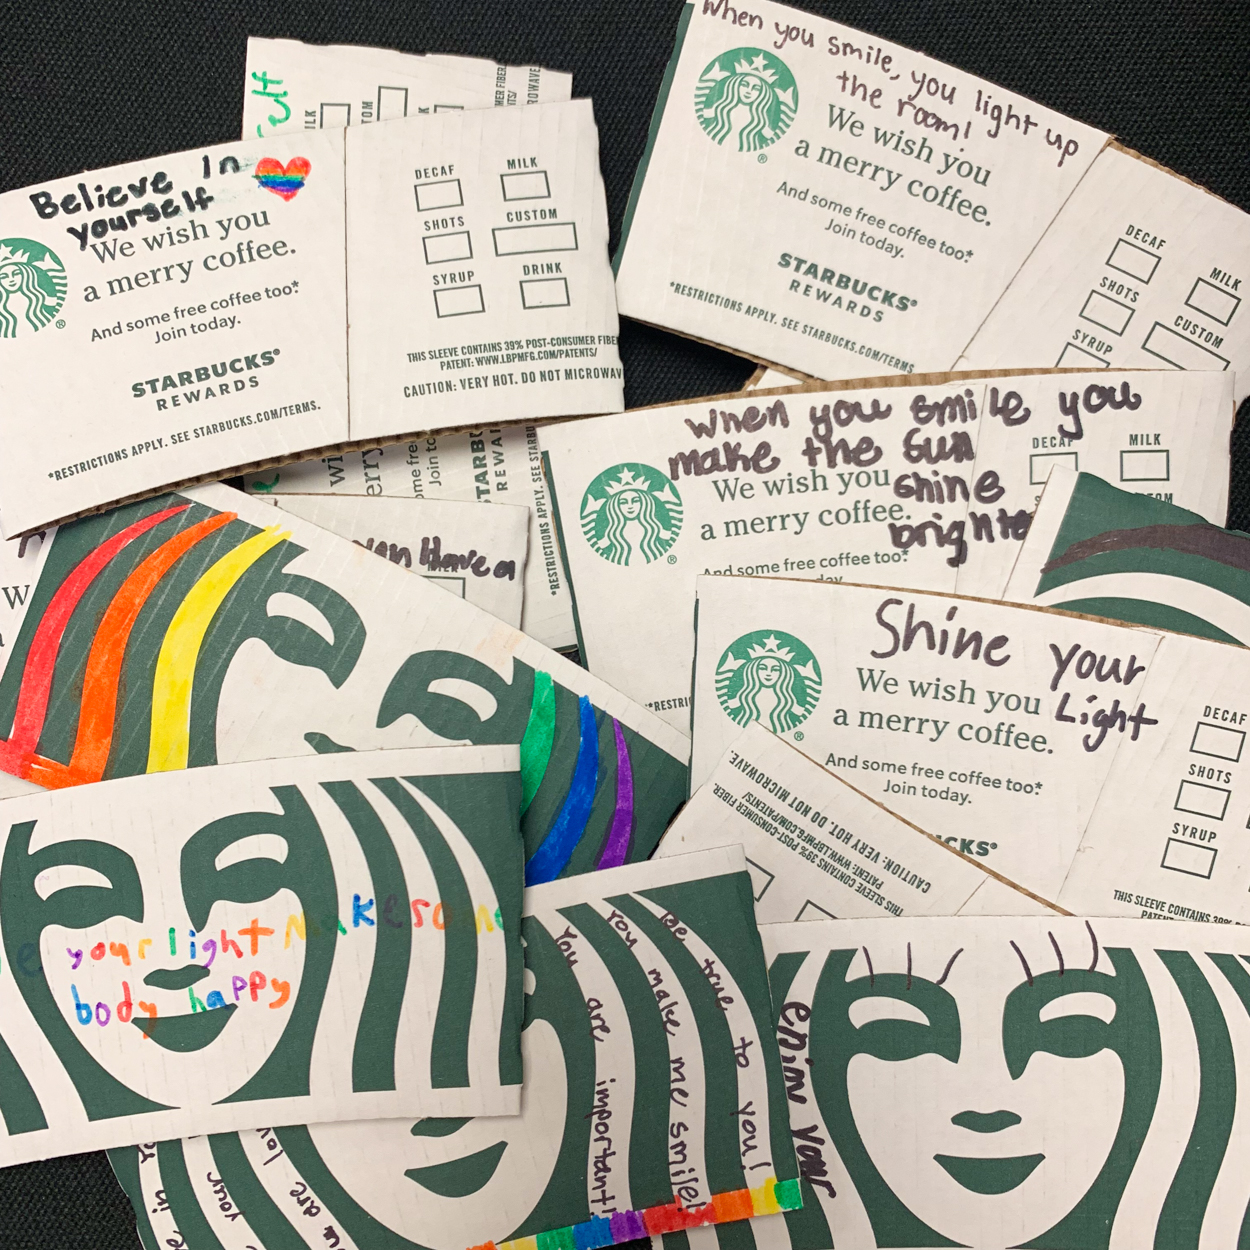 Starbucks sleeves decorated by students.